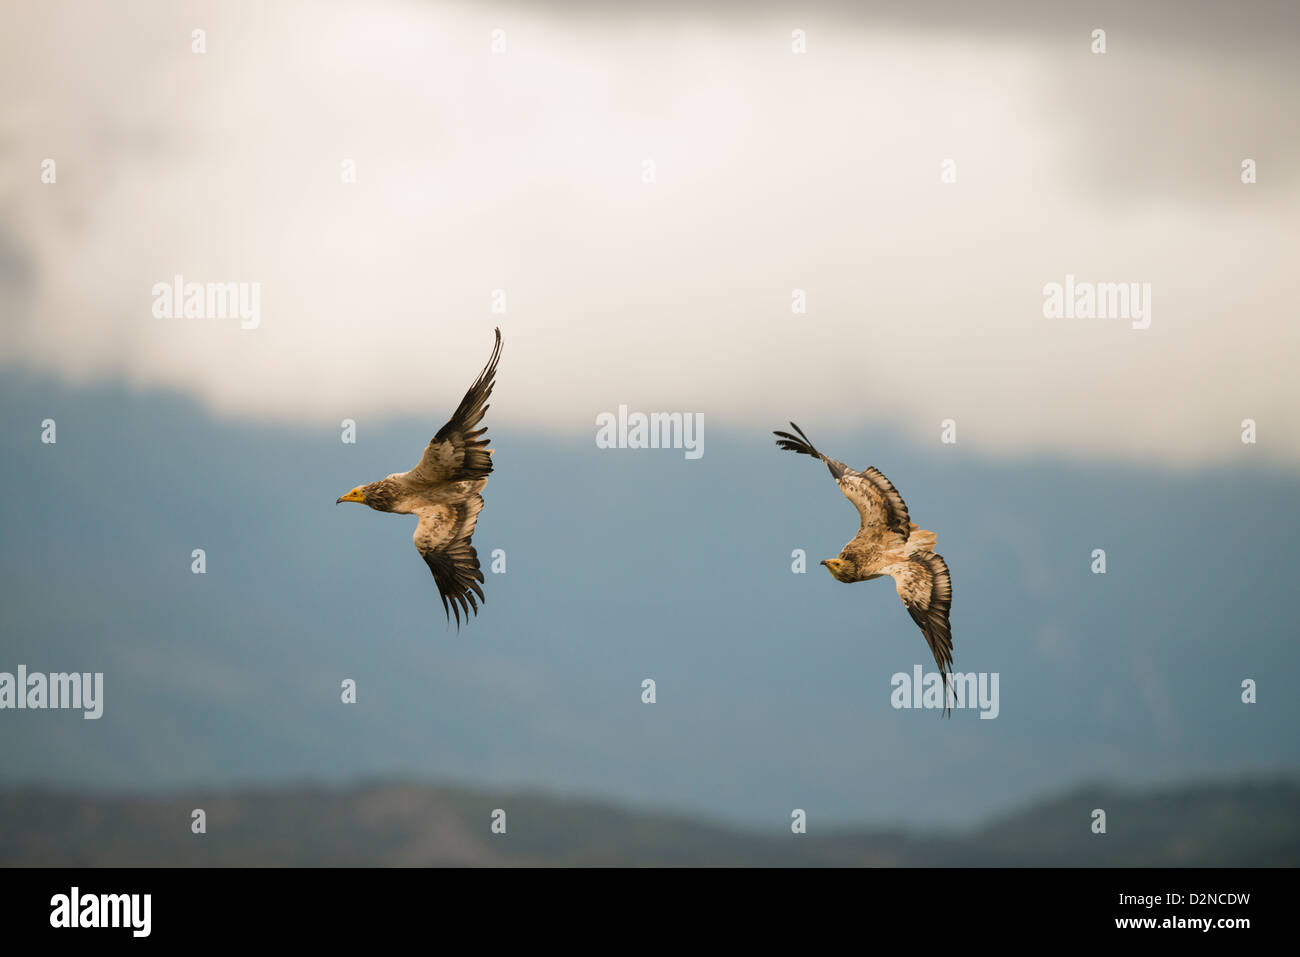 Couple of Egyptian vultures (Neophron percnopterus) playing in flight, Spain Stock Photo